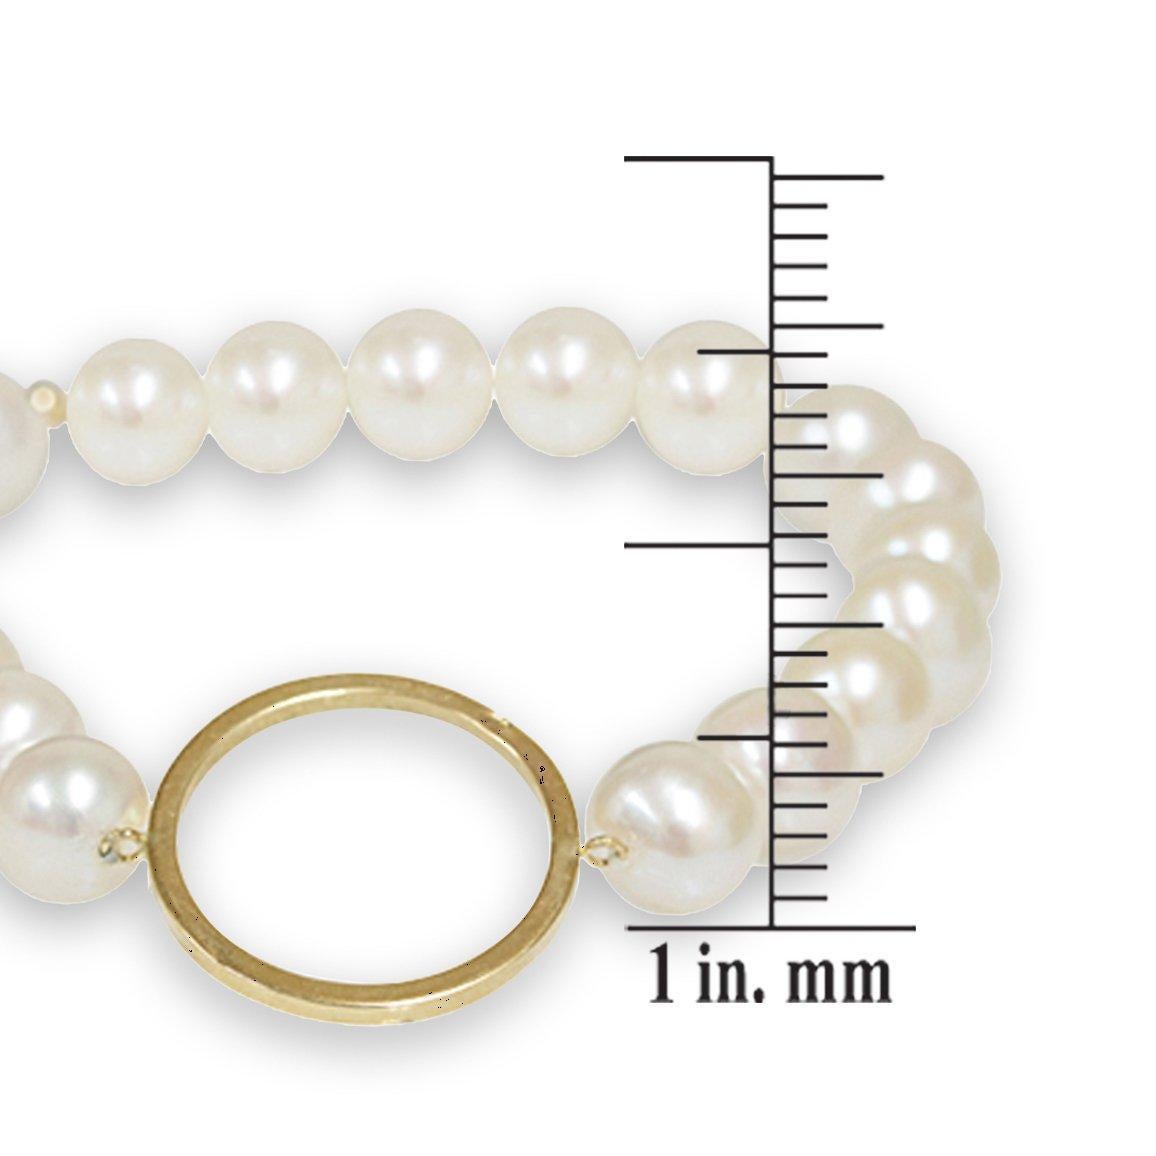 Classic and elegant, this beautiful bracelet is crafted from a strand of lustrous white freshwater pearls. The delicate round pearl strand is enhanced by large 14-karat yellow gold circle that adds a contemporary twist to this beautiful and